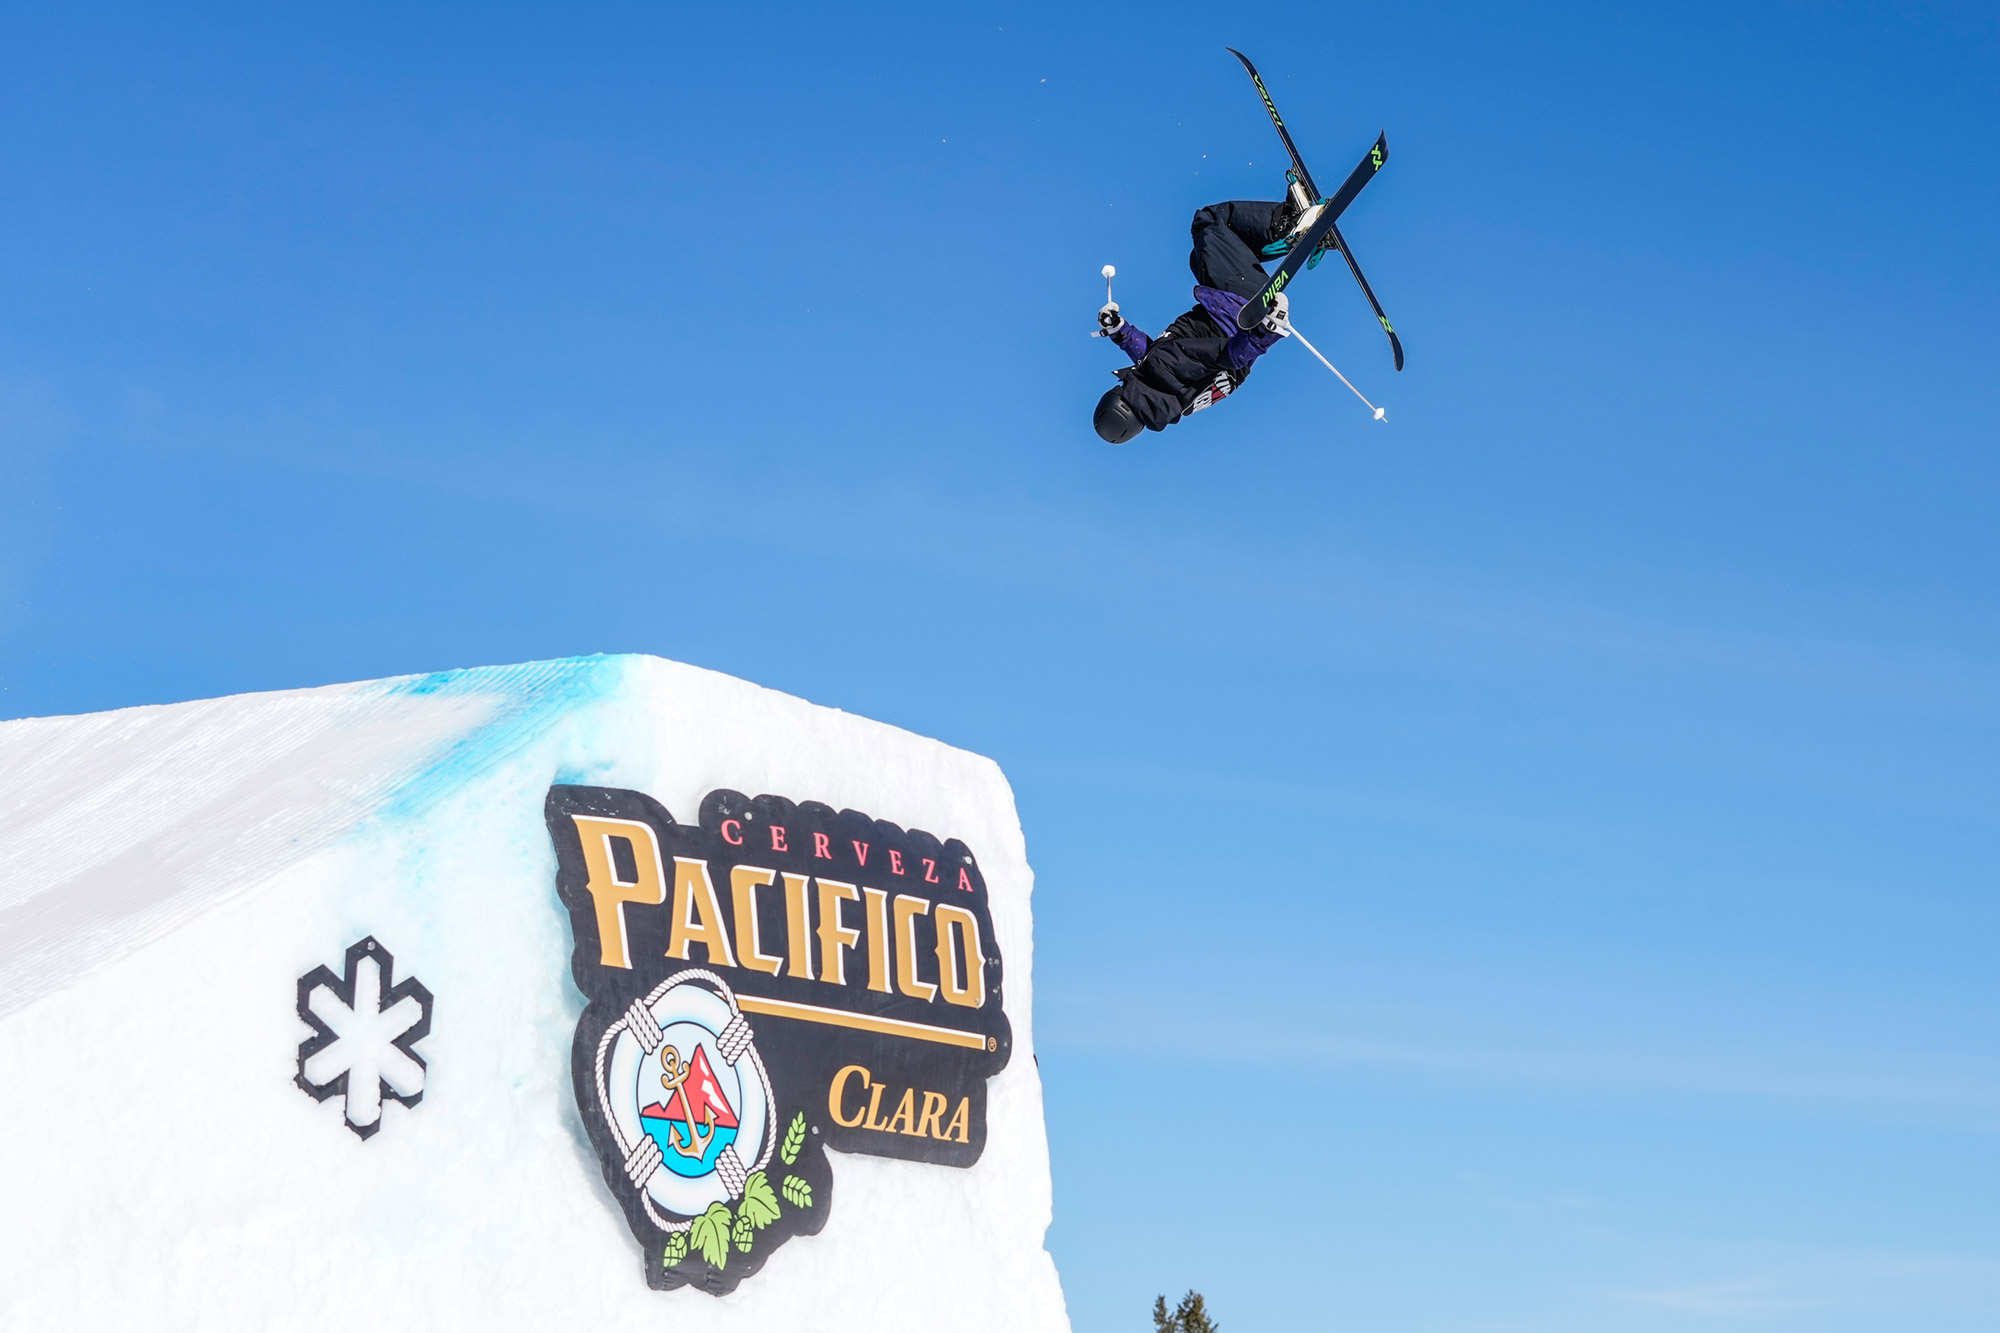 Kirsty Muir competes in slopestyle at the 2022 X Games in Aspen, Colorado